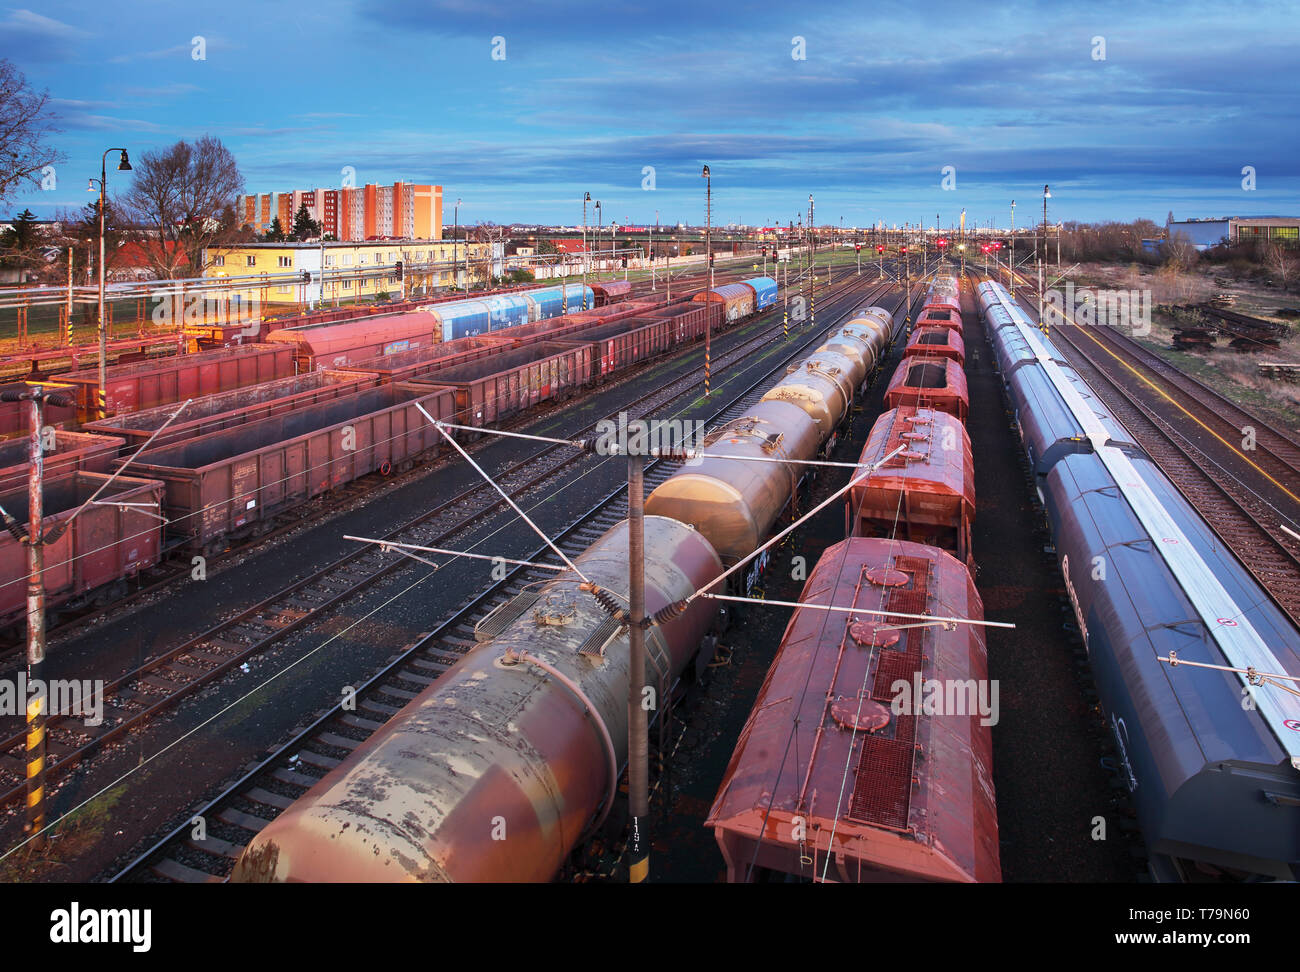 Container Freight Train in Station, Cargo railway transportation industry Stock Photo